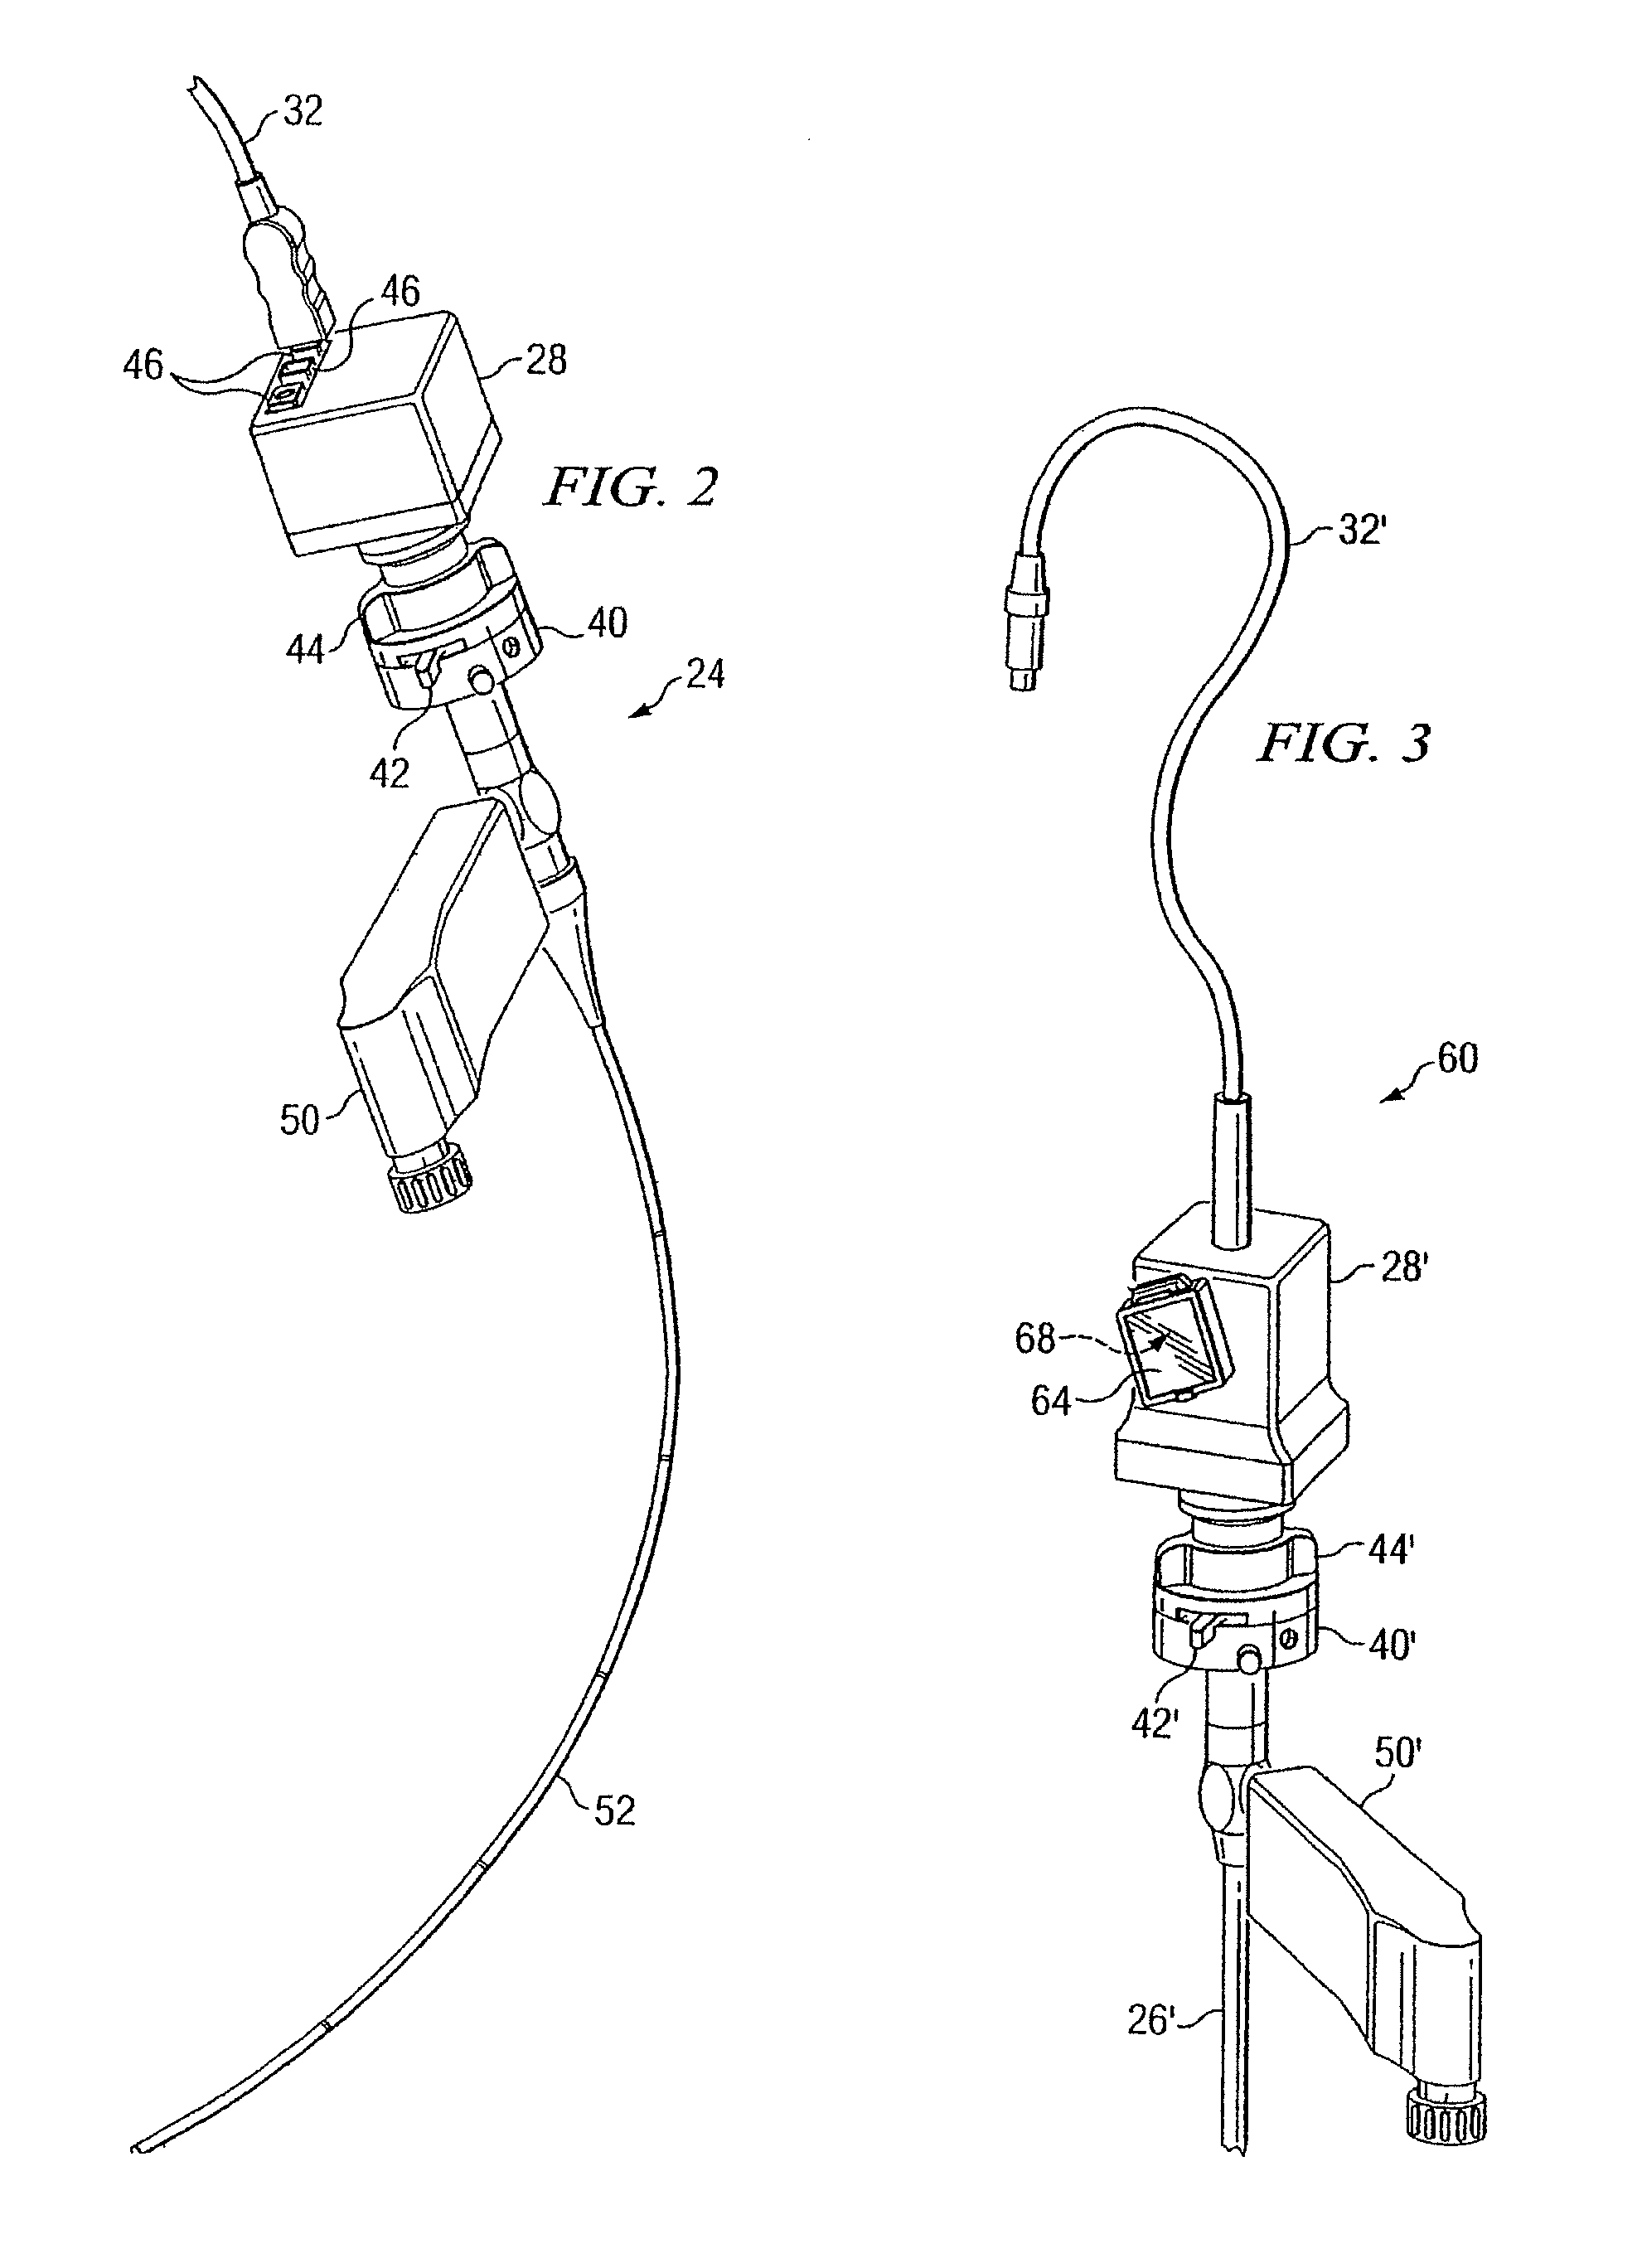 Endoscopic imaging system